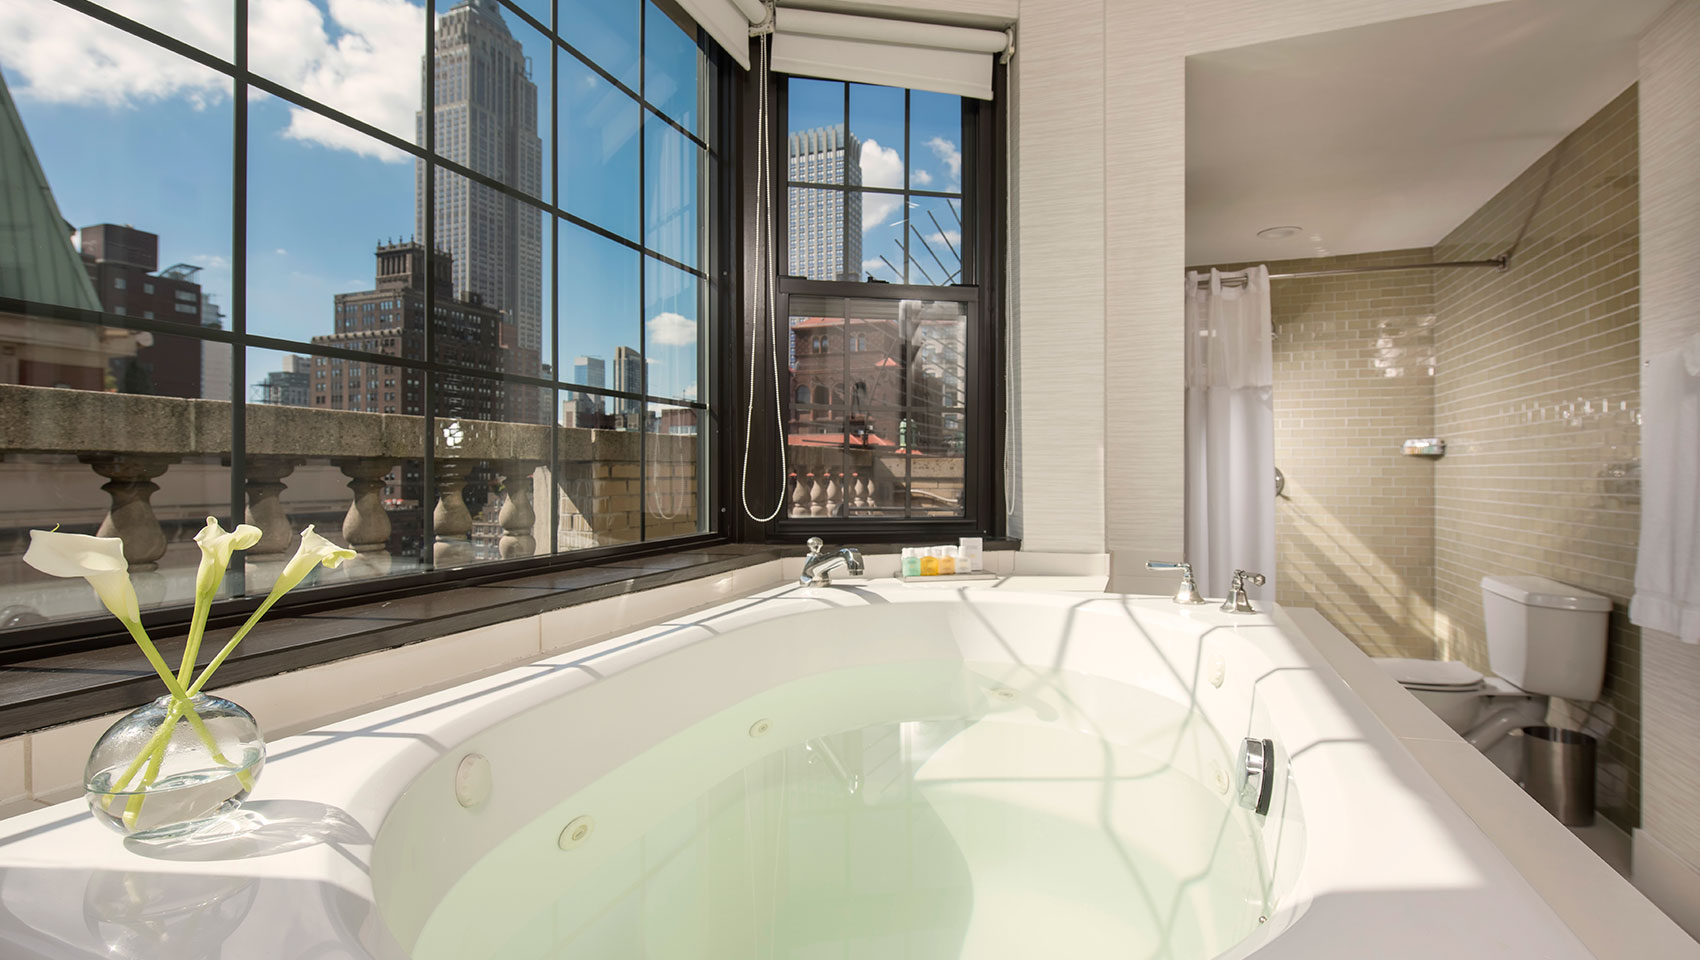 bathtub with empire state building view